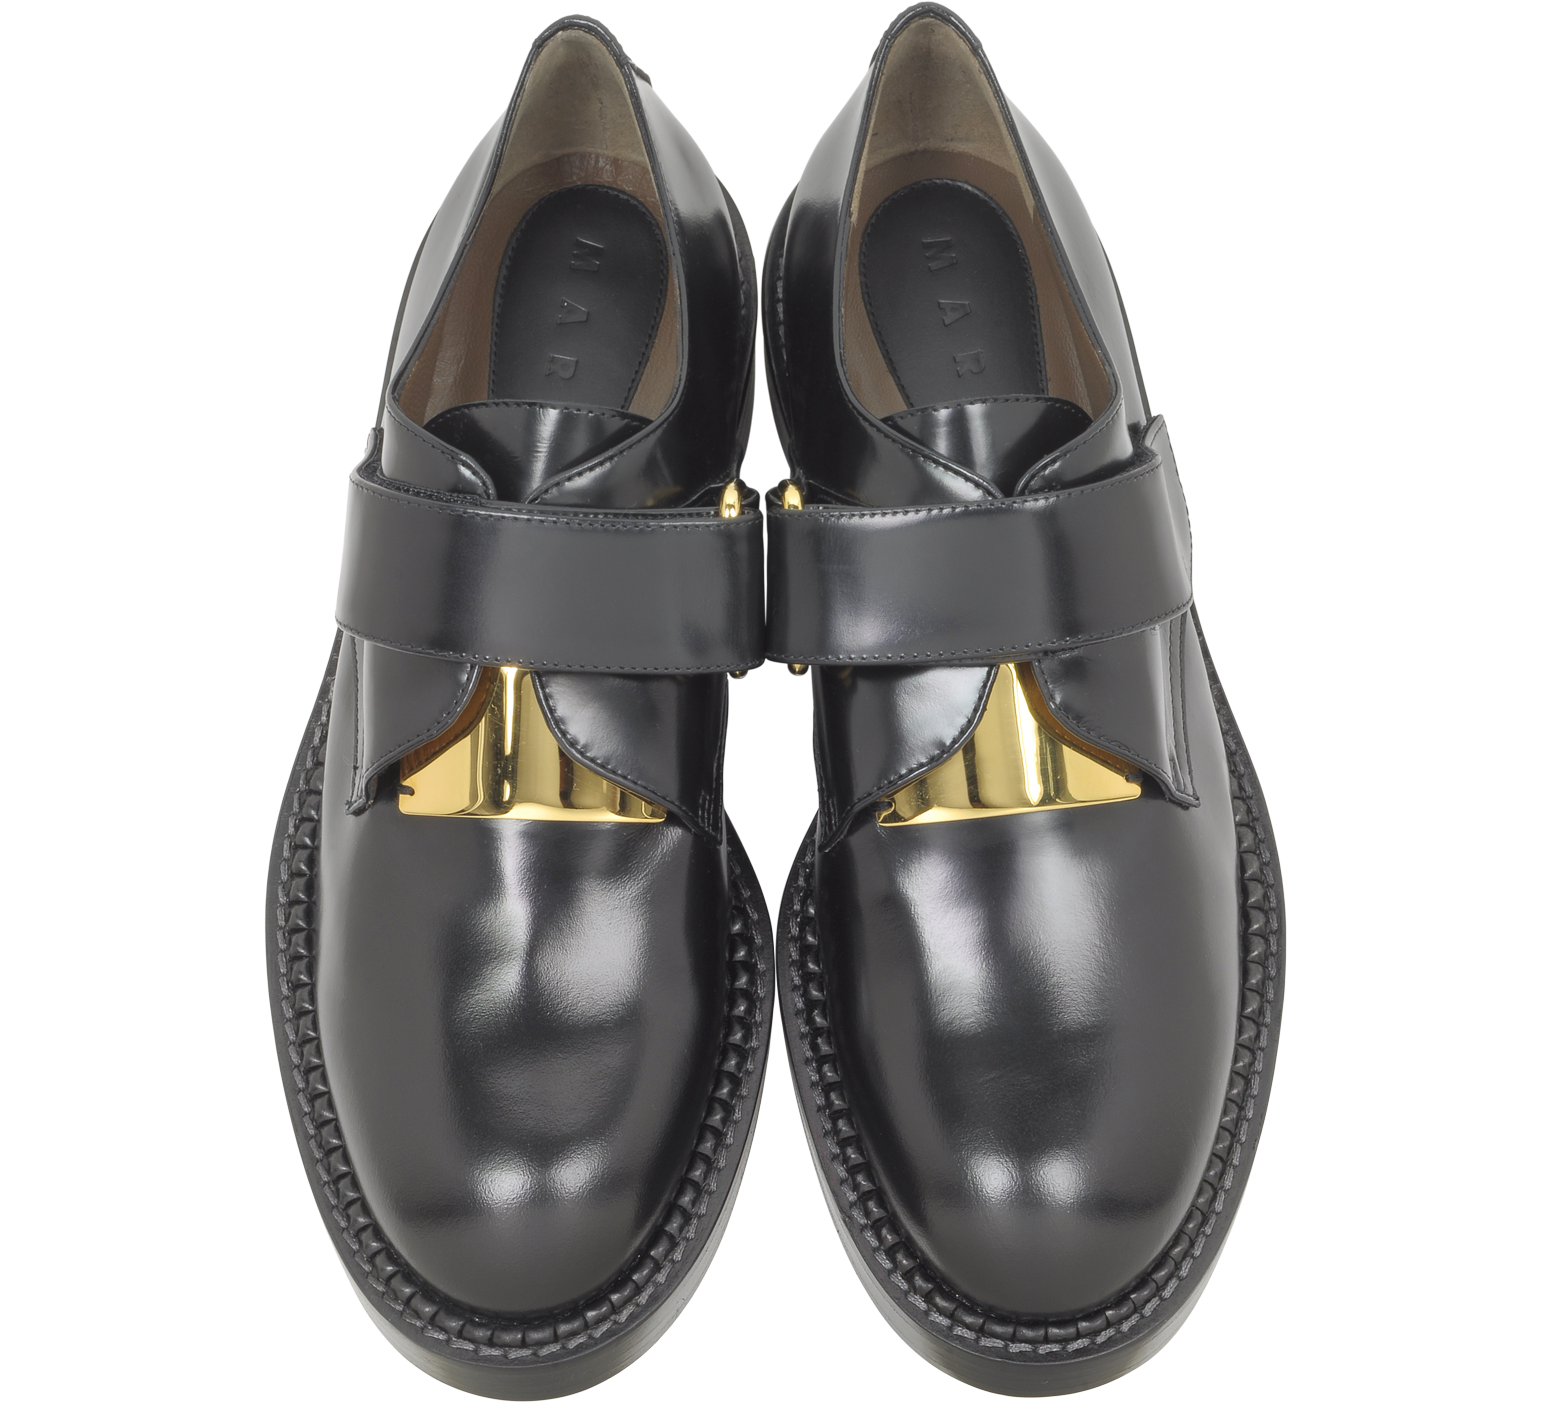 Marni Village Lux Black and Gold Leather Derby Shoe 36 IT/EU at FORZIERI